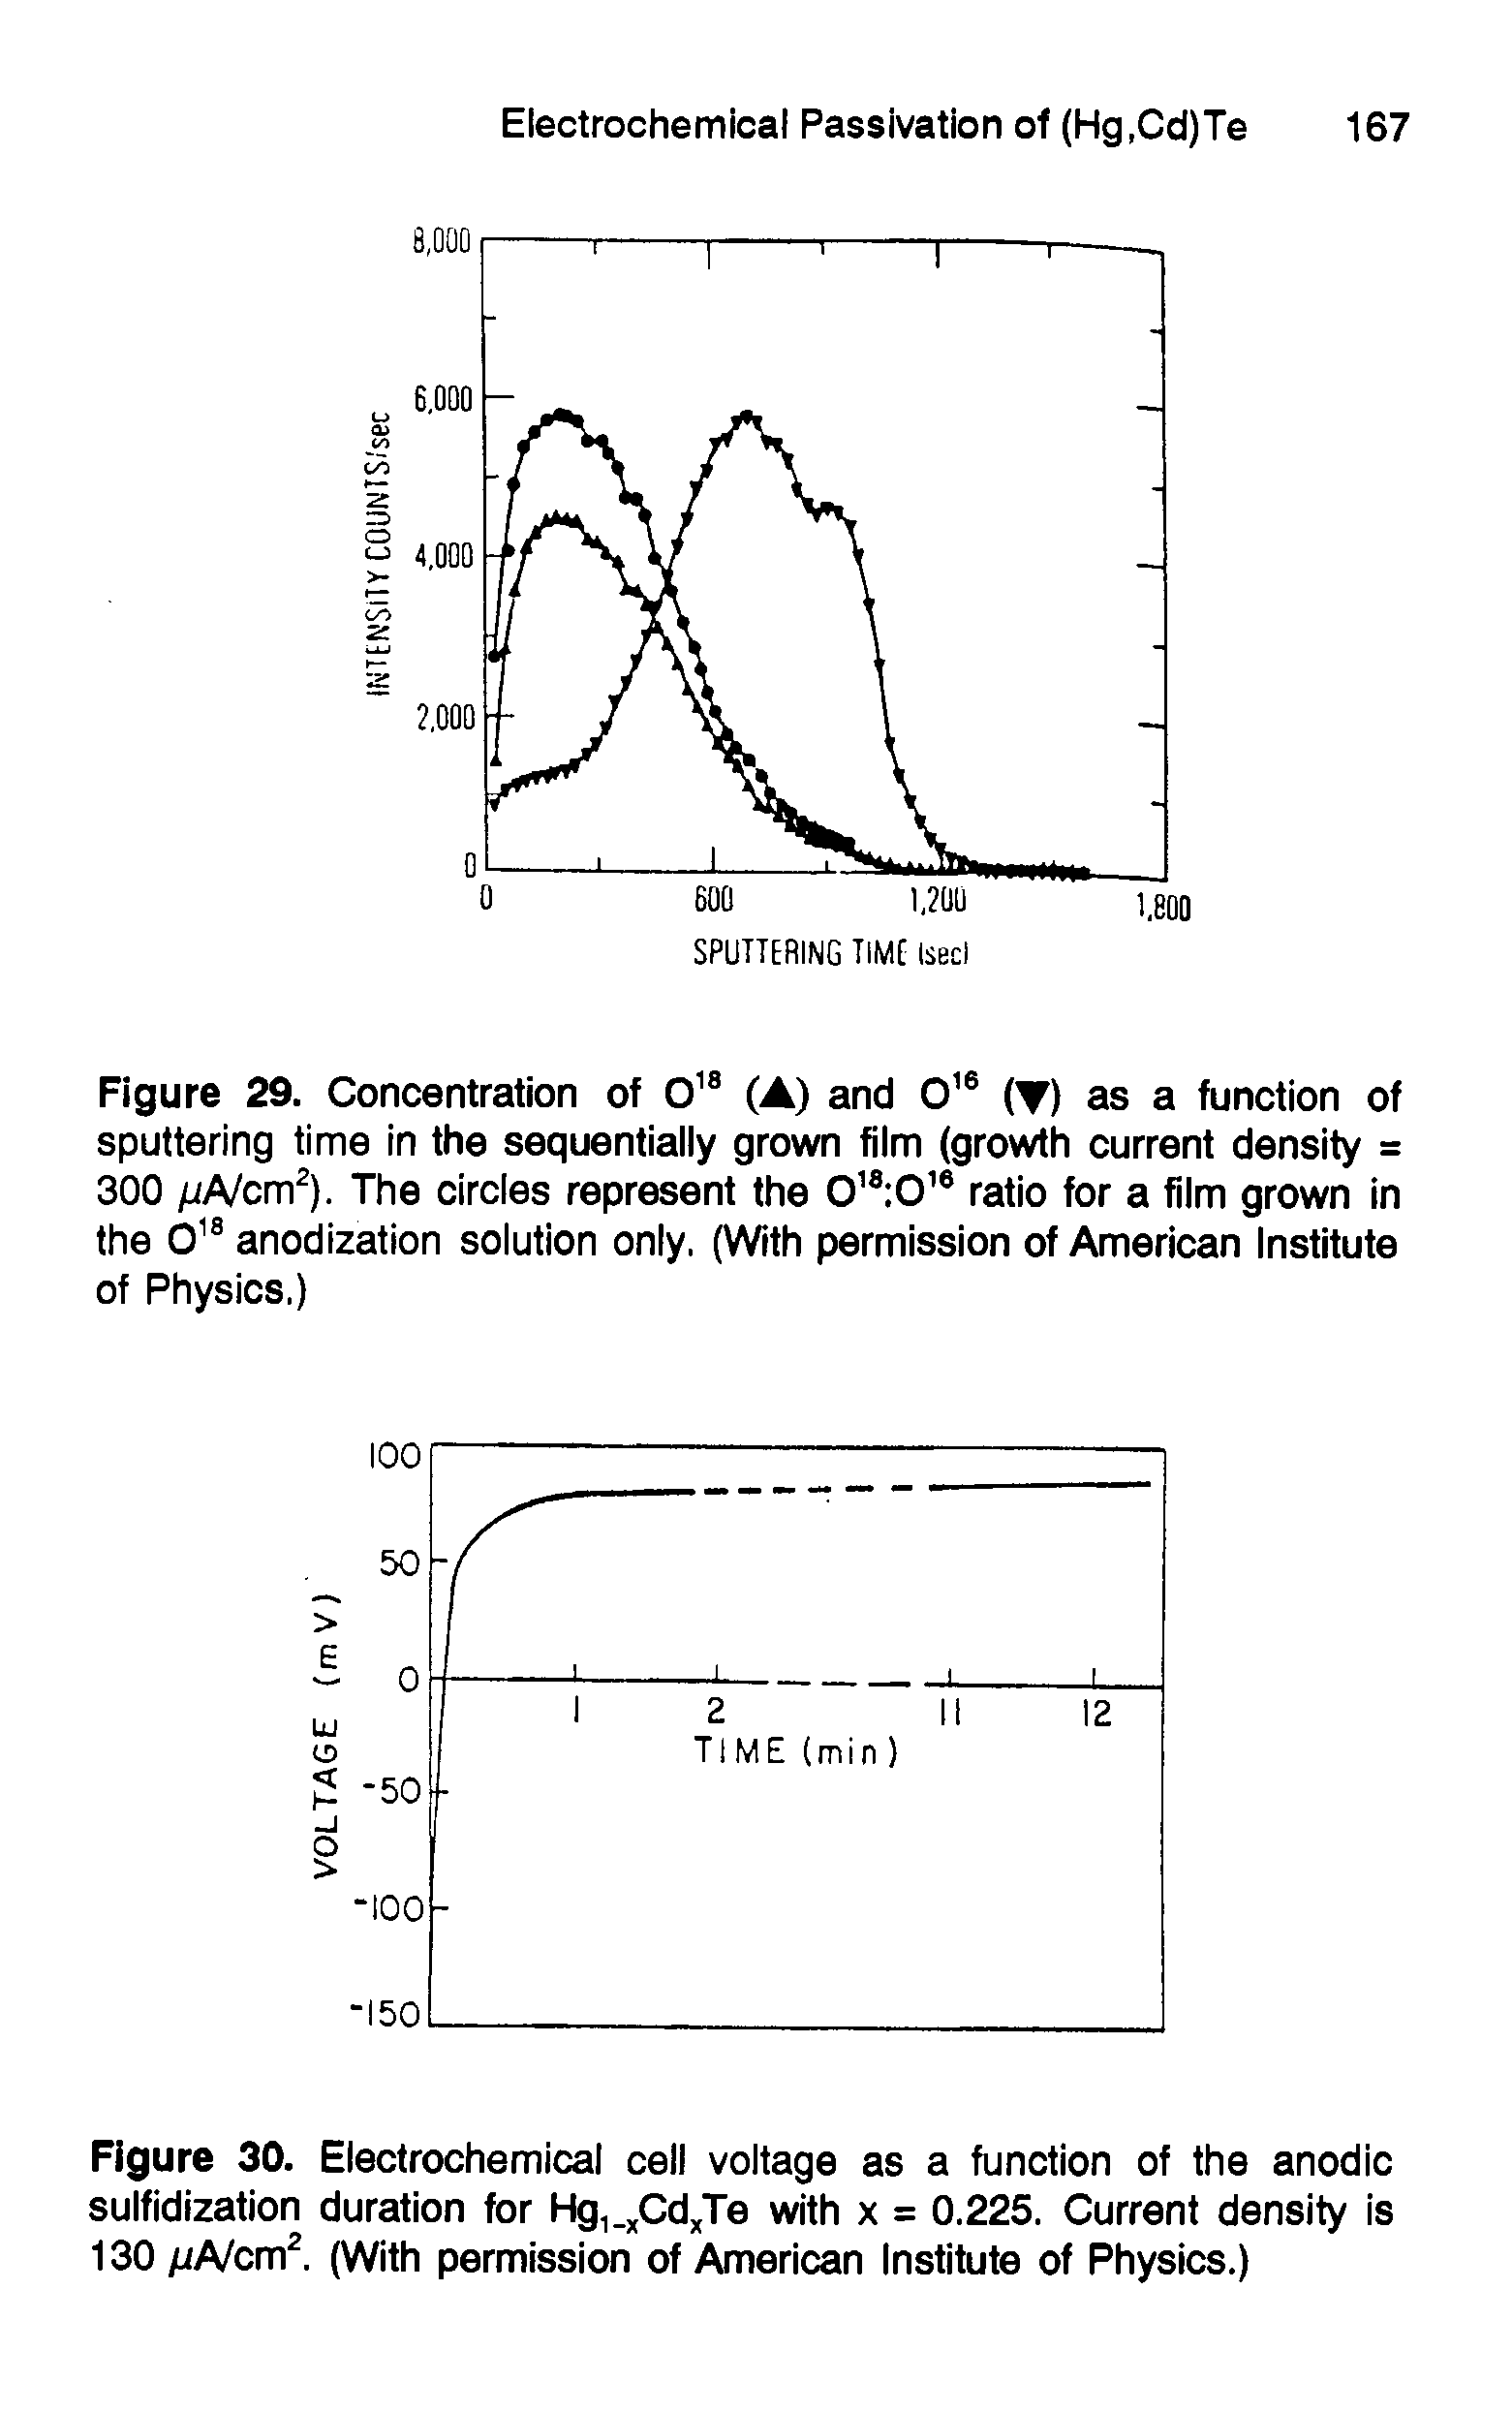 Figure 30. Electrochemical cell voltage as a function of the anodic sulfidization duration for Hg. Cd Te with x = 0,225, Current density is 130 /iA/cm . (With permission of American Institute of Physics.)...